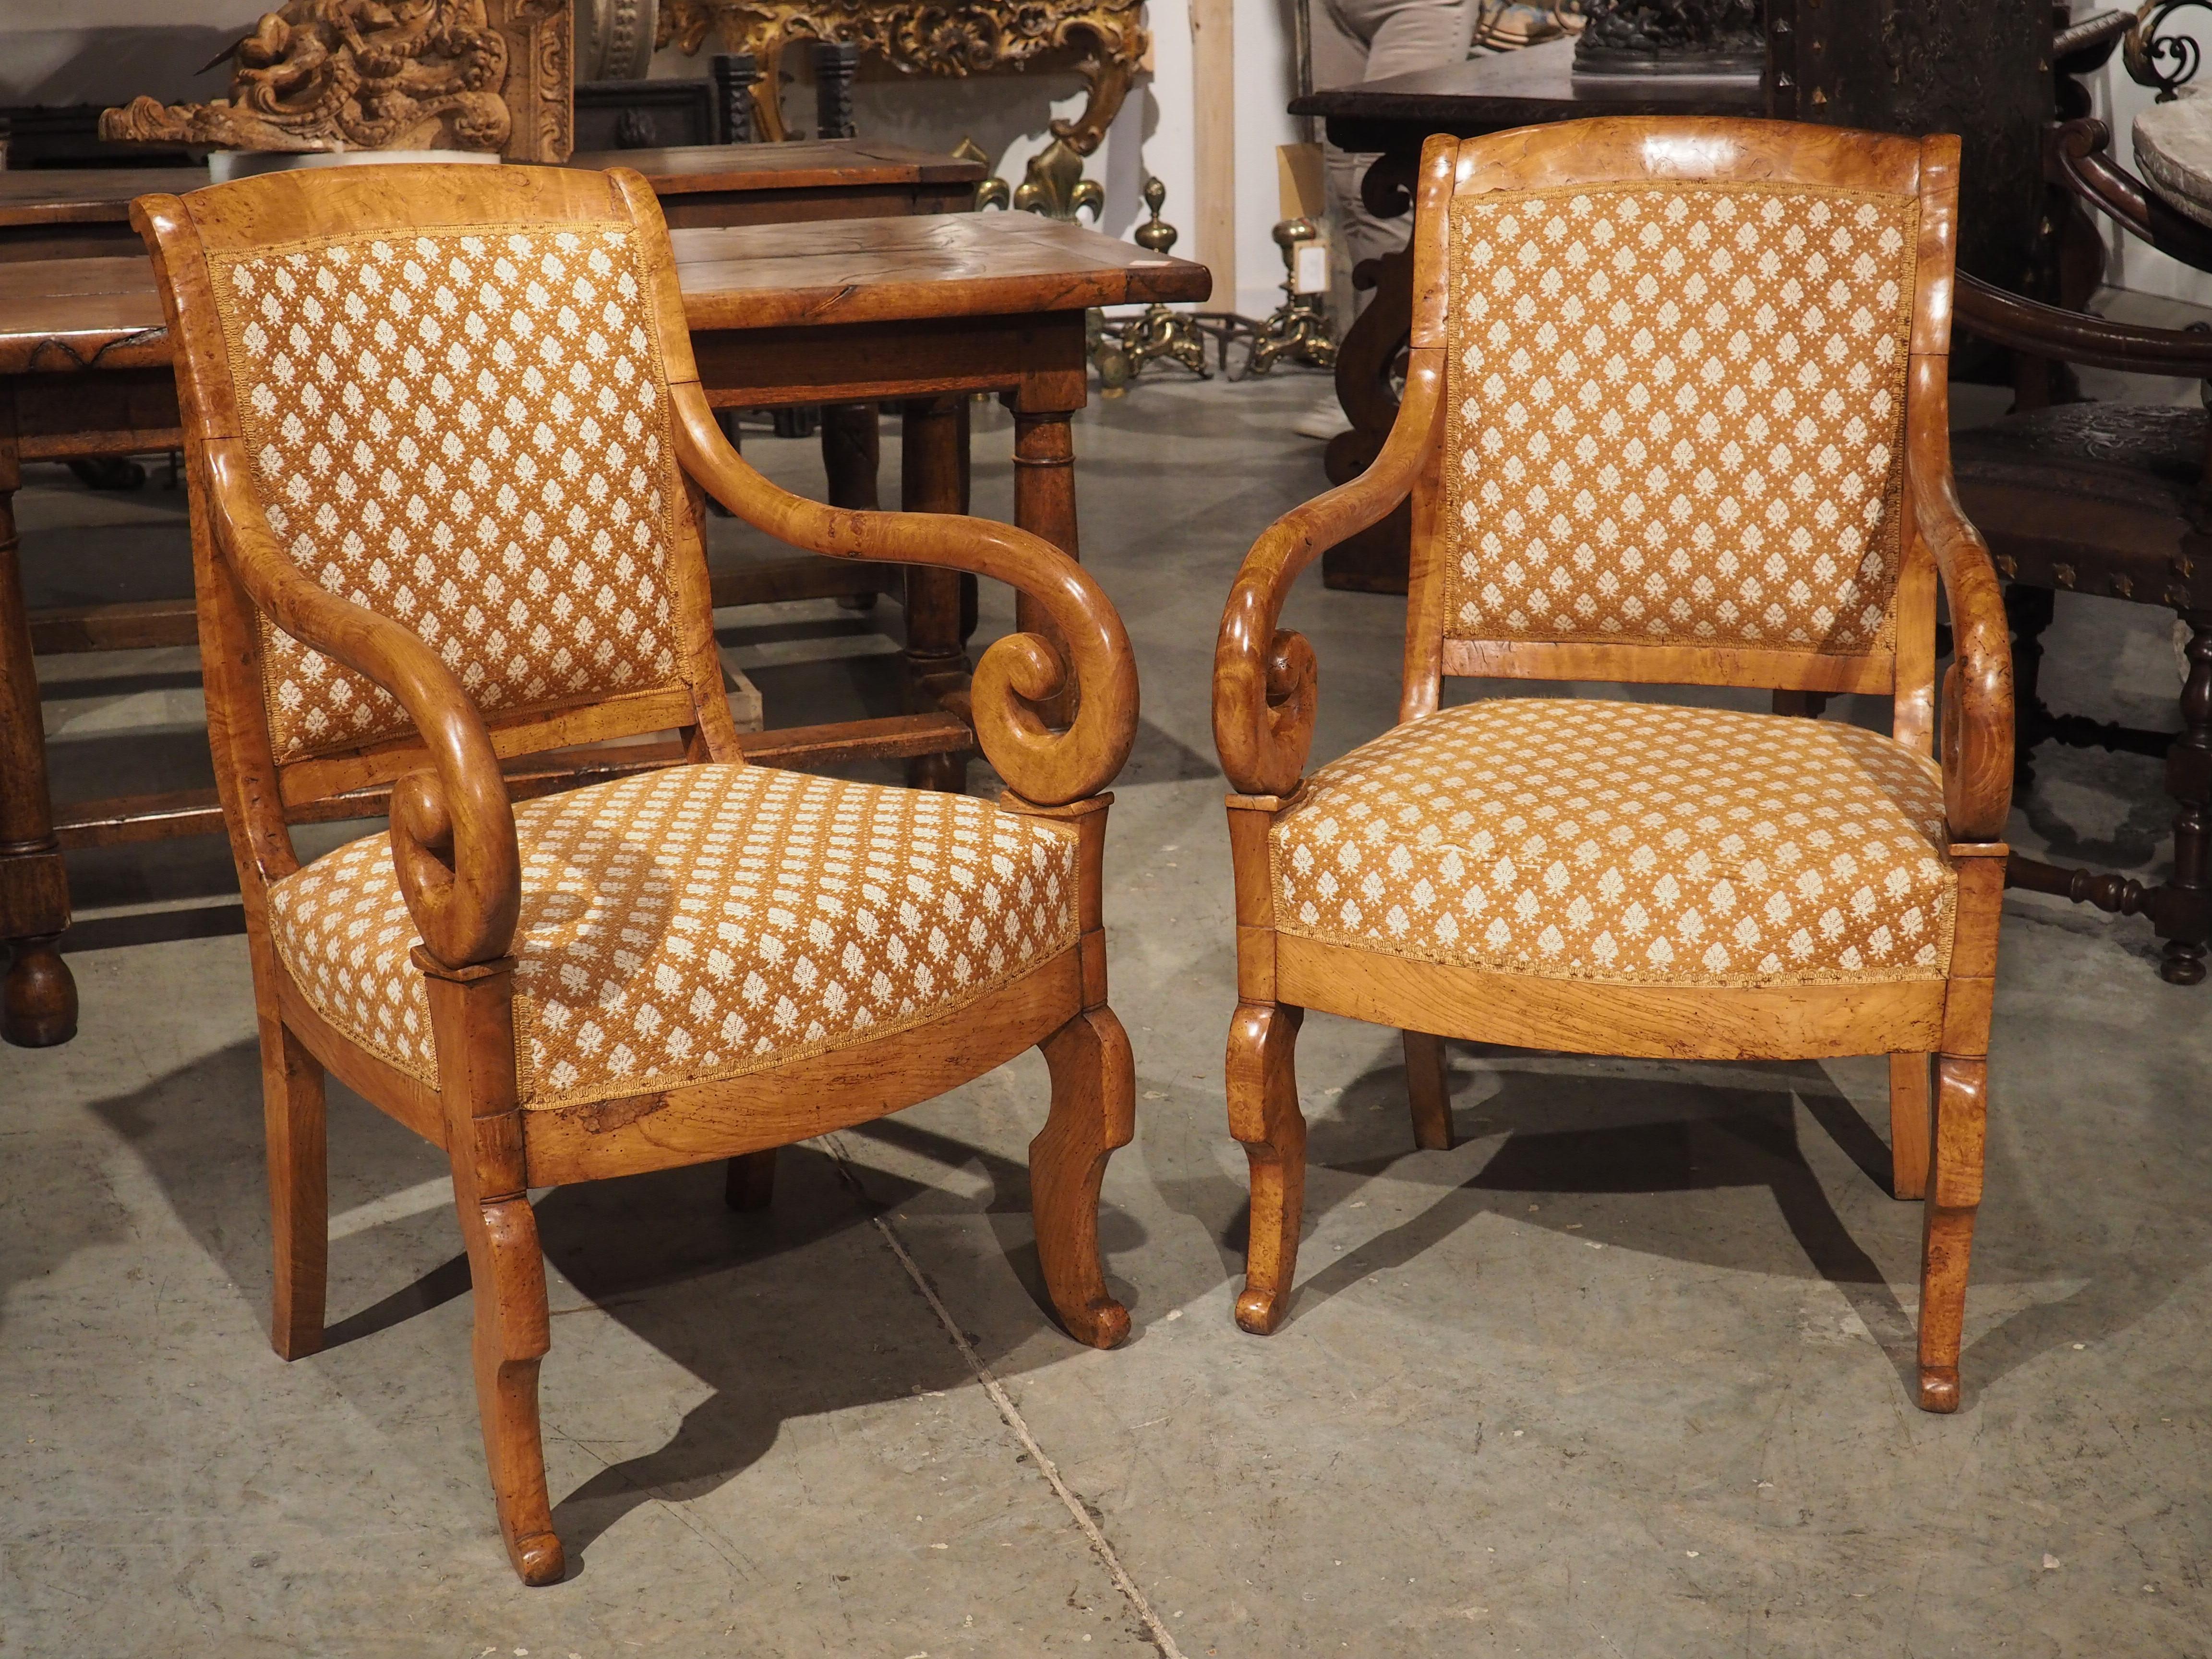 Known as pied en cuisse de grenouille, or “frog leg foot”, this pair of elmwood armchairs has interesting front legs formed by counter curves. Hand-carved in France, circa 1840, the armchairs are Louis Philippe, the period in which these motifs were